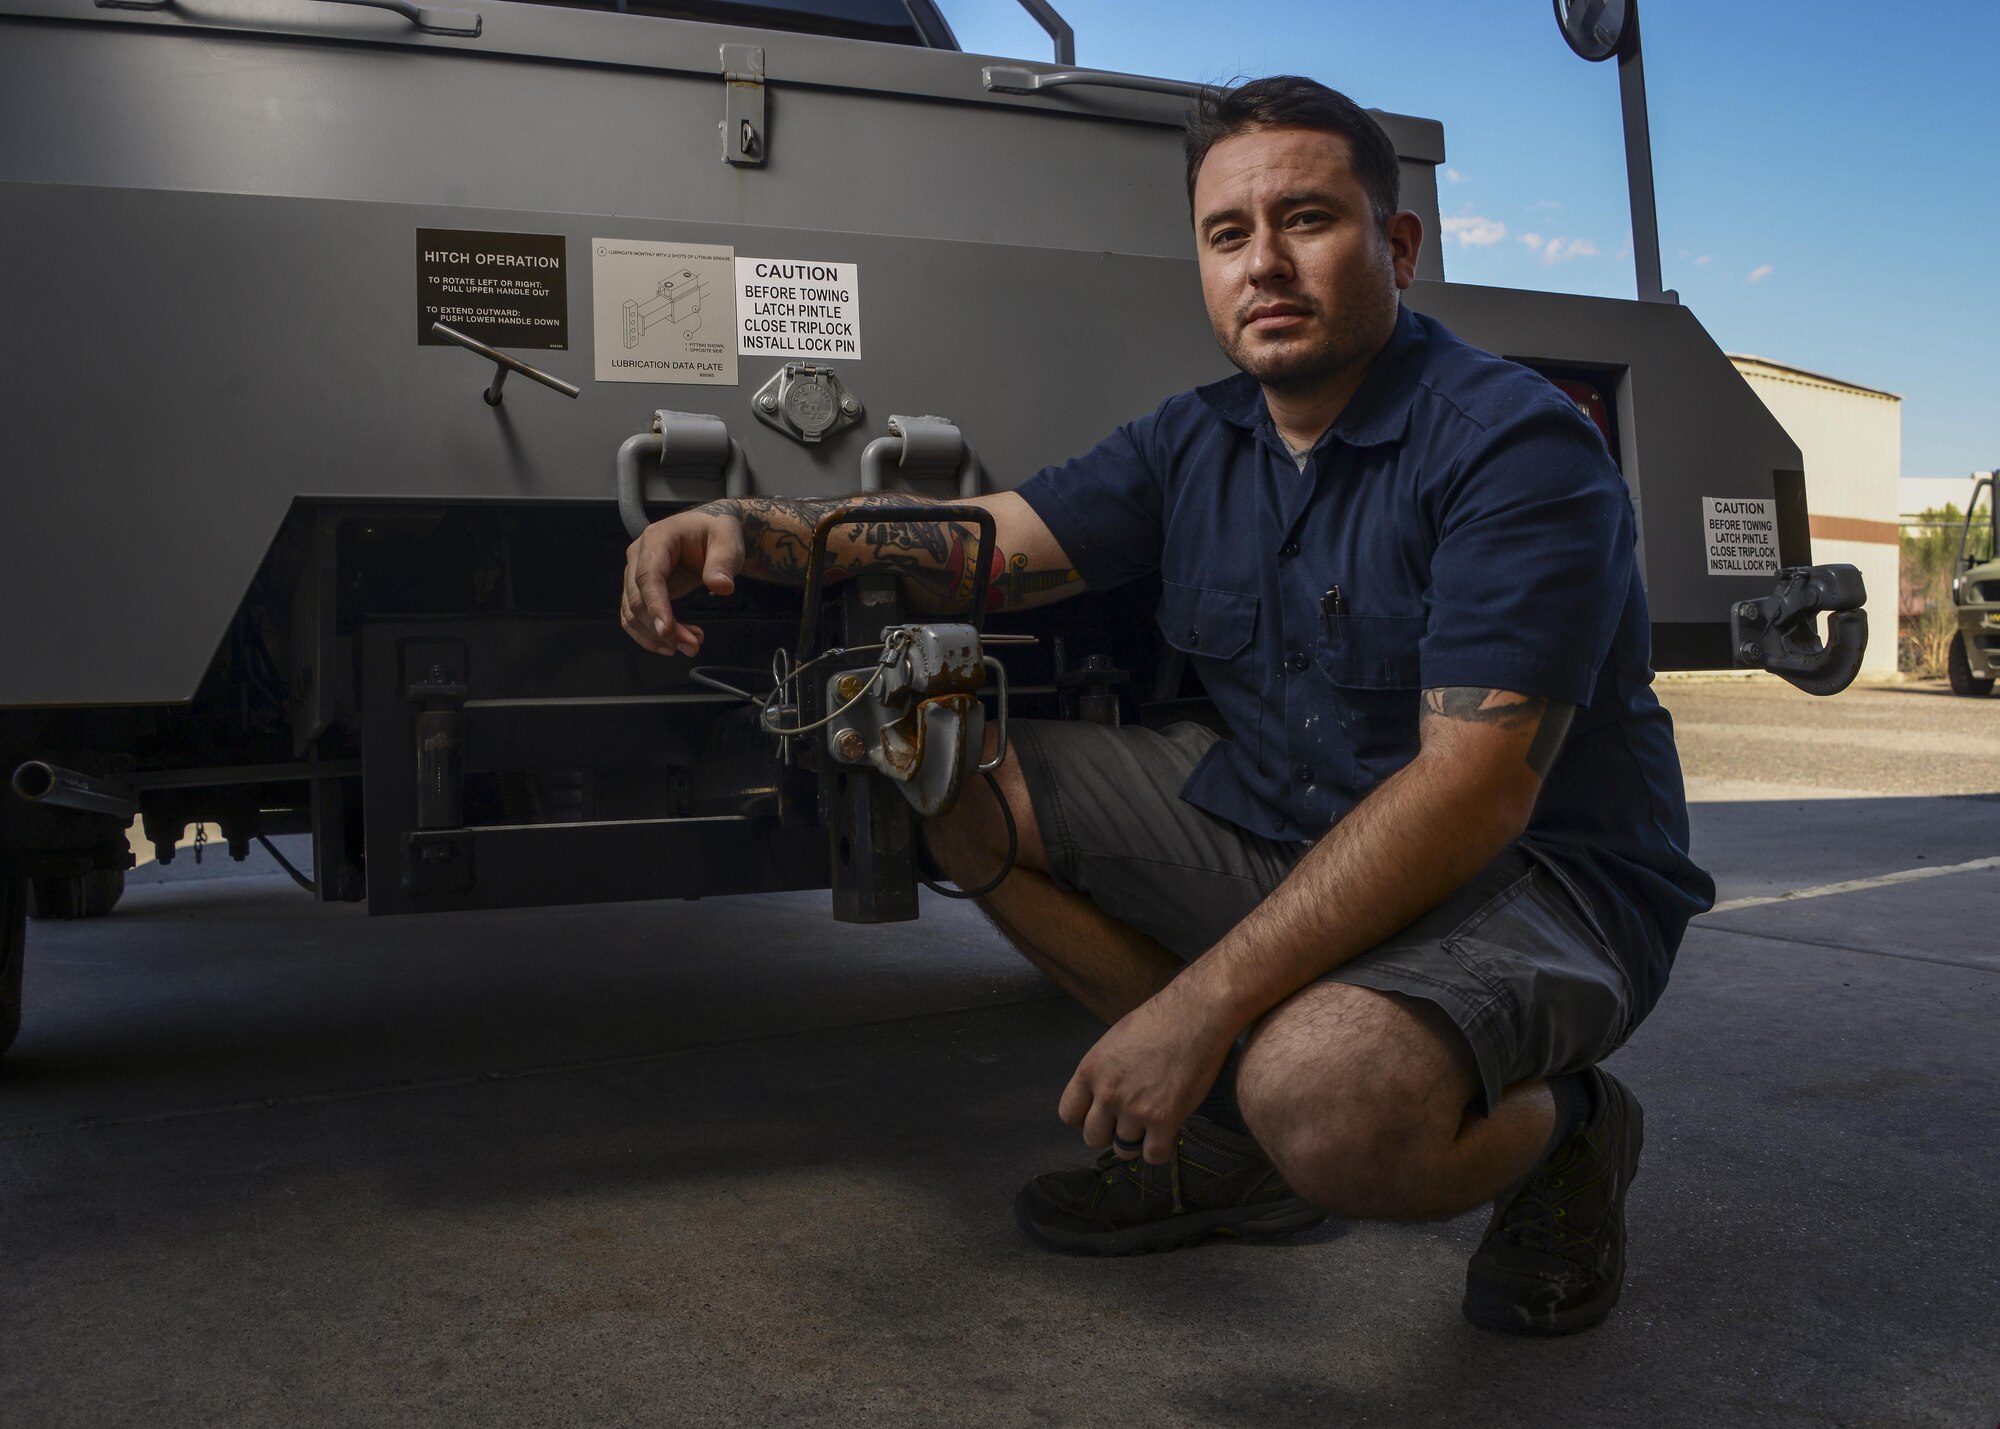 Daniel Villela, 56th Logistics Readiness Squadron mobile equipment mechanic, poses for a portrait next to the pintle hook assembly on a bobtail Sept. 14, 2017 at Luke Air Force Base, Ariz. Villela was the lead mechanic to provide the steps in reconfiguring and implementing a fix to the pintle hook mechanism for the bobtails that tow the F-35 on the flightline at Luke. (U.S. Air Force photo/Airman 1st Class Caleb Worpel)